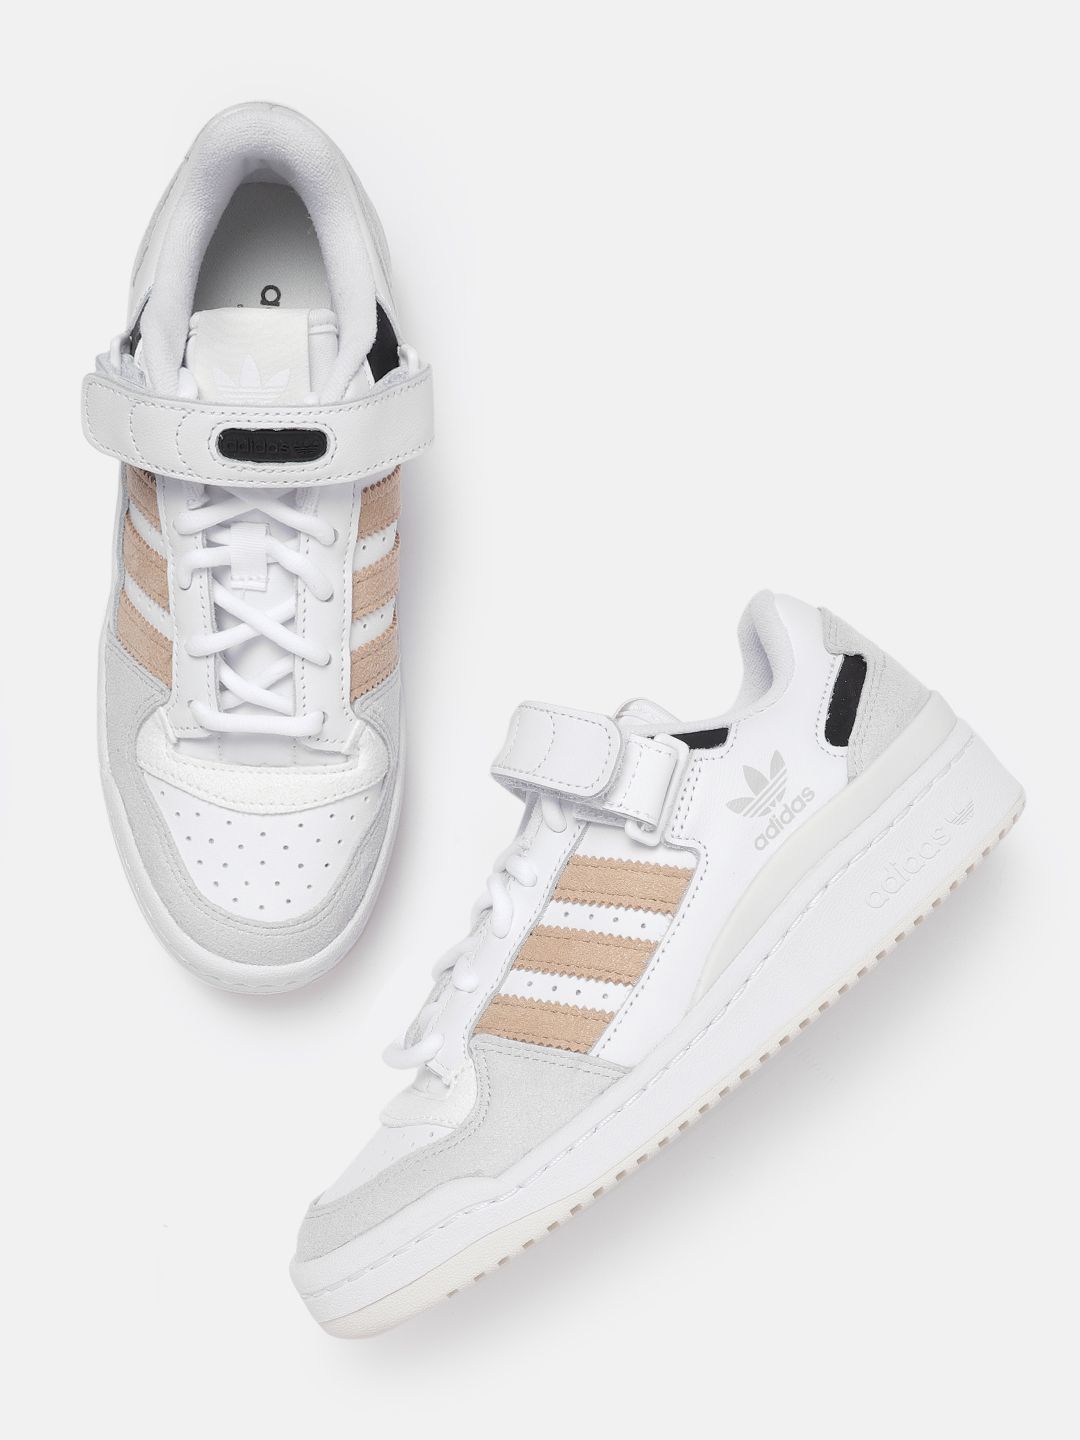 ADIDAS Originals Women White & Beige Perforated Colourblocked Leather Forum Low Sneakers Price in India